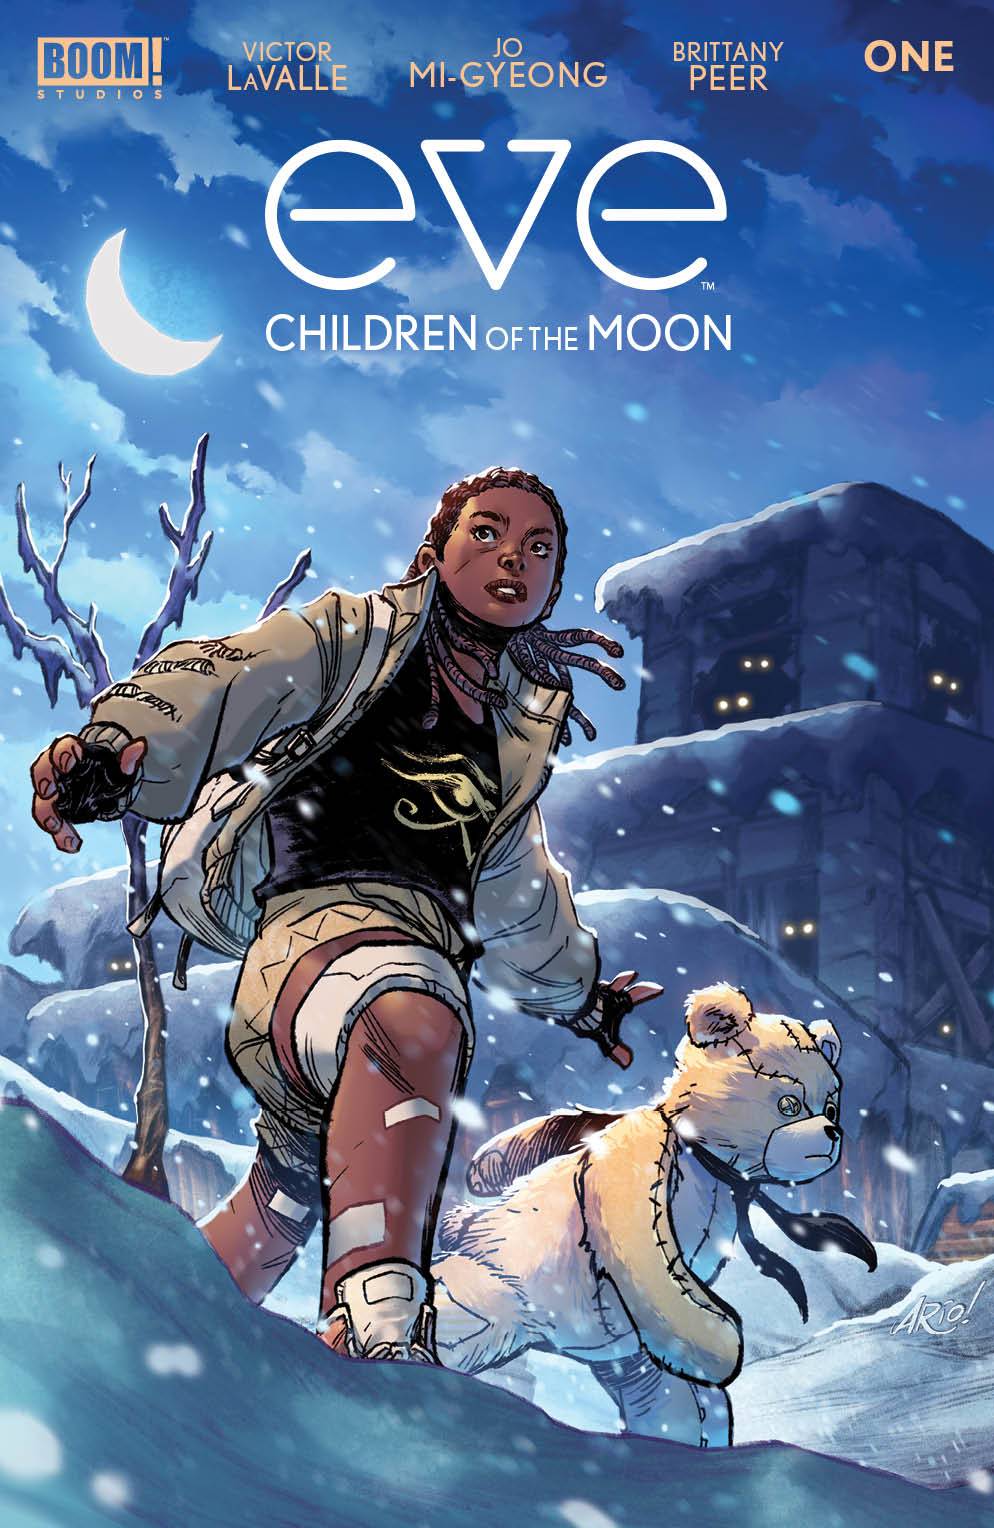 EVE CHILDREN OF THE MOON #1 (OF 5) CVR A ANINDITO